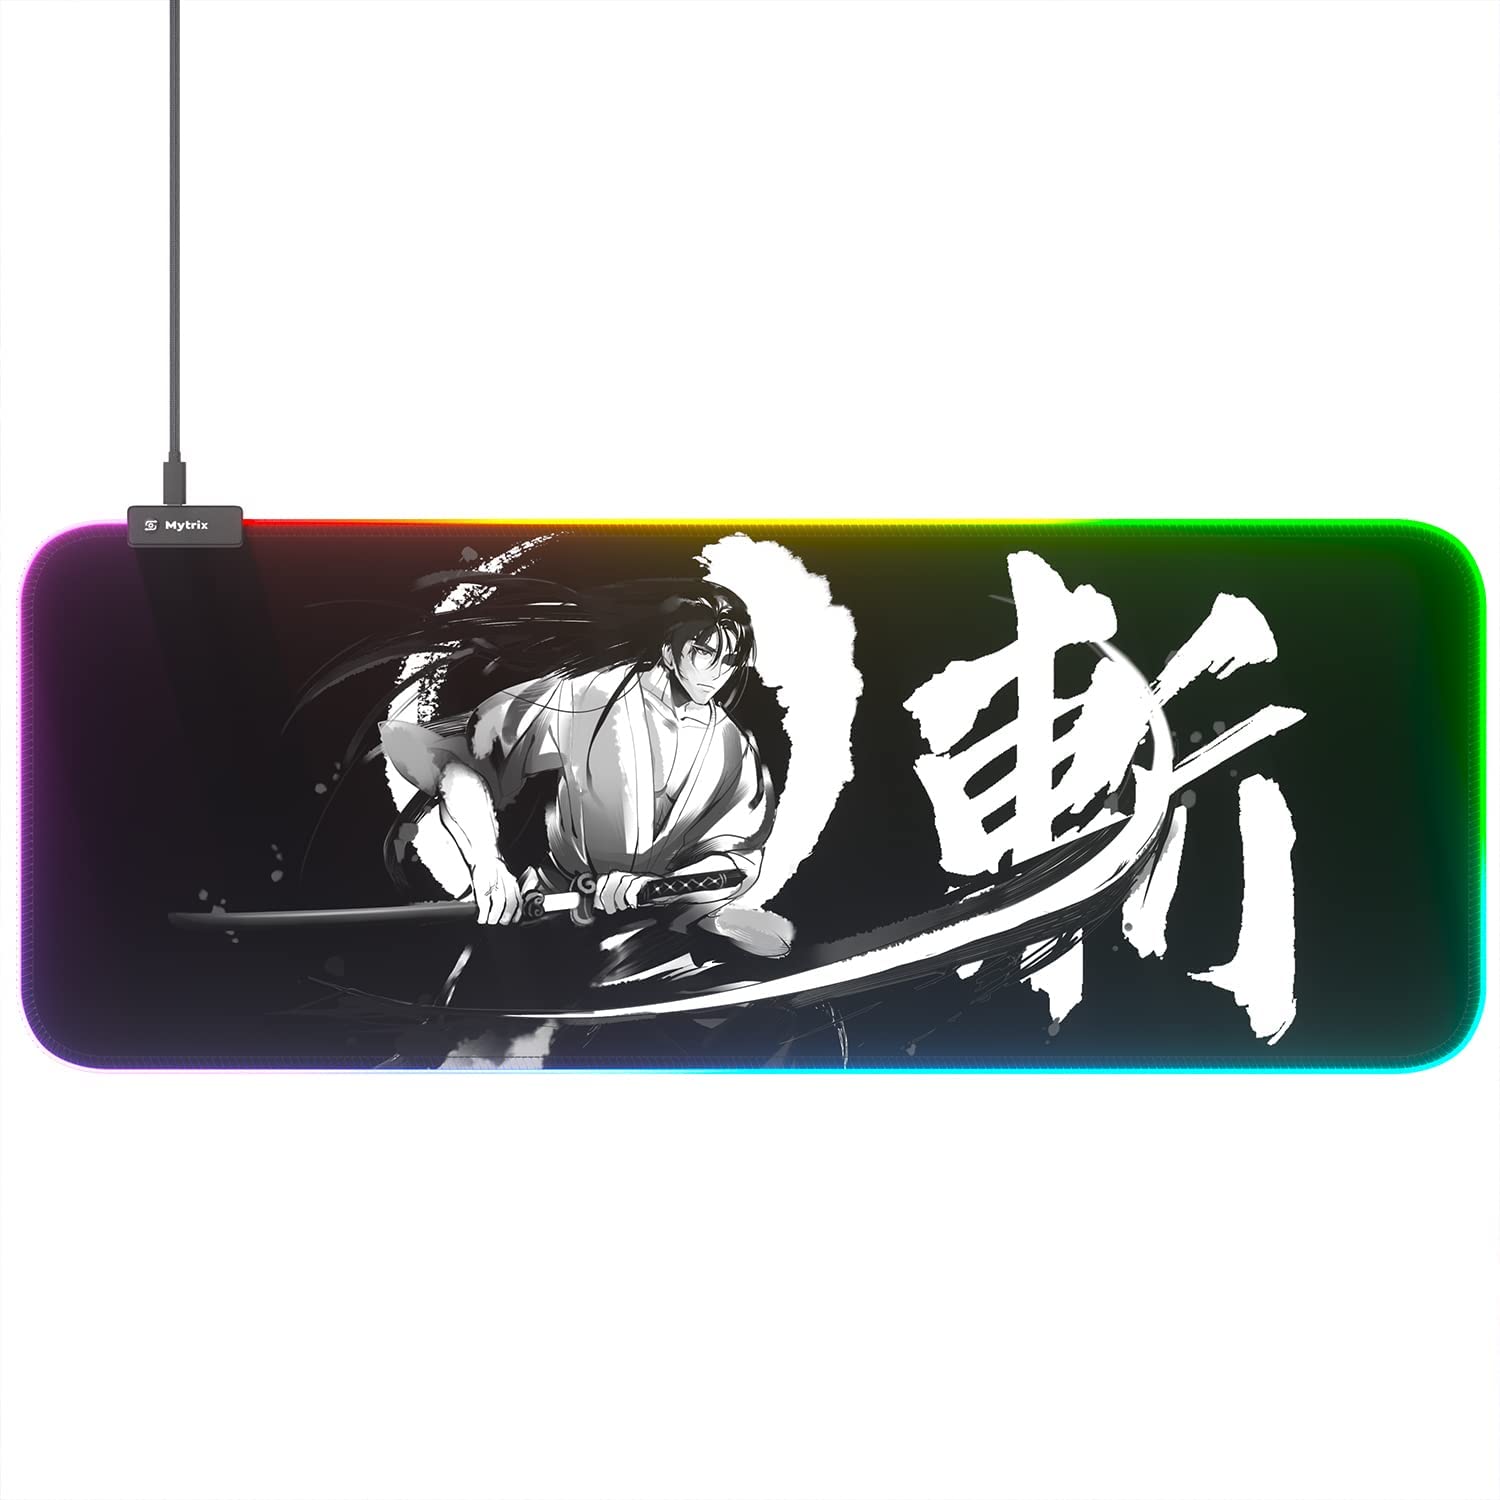 Mytrix Japanese Samurai RGB Gaming Mouse Pad, LED Soft Extended Large Office Mouse Pad, Anti-Slip Rubber Base, Keyboard Mouse Mat - Black